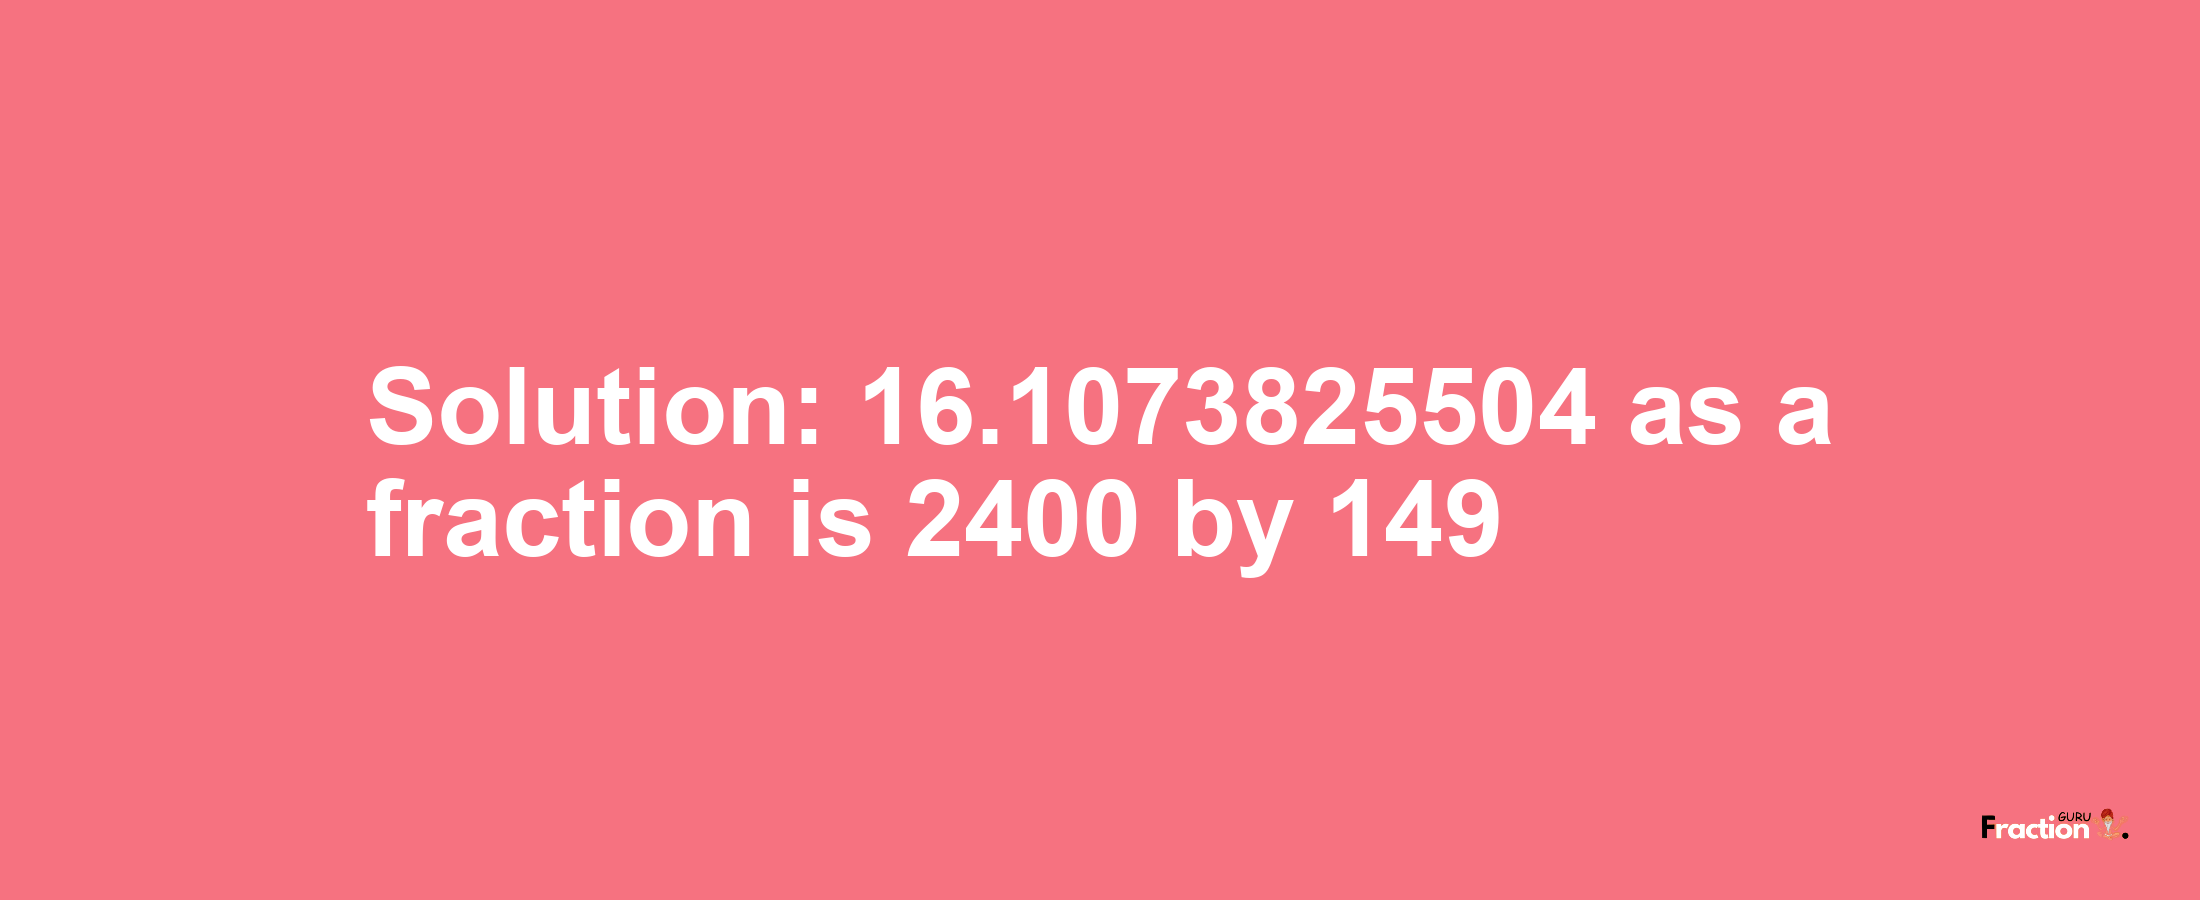 Solution:16.1073825504 as a fraction is 2400/149